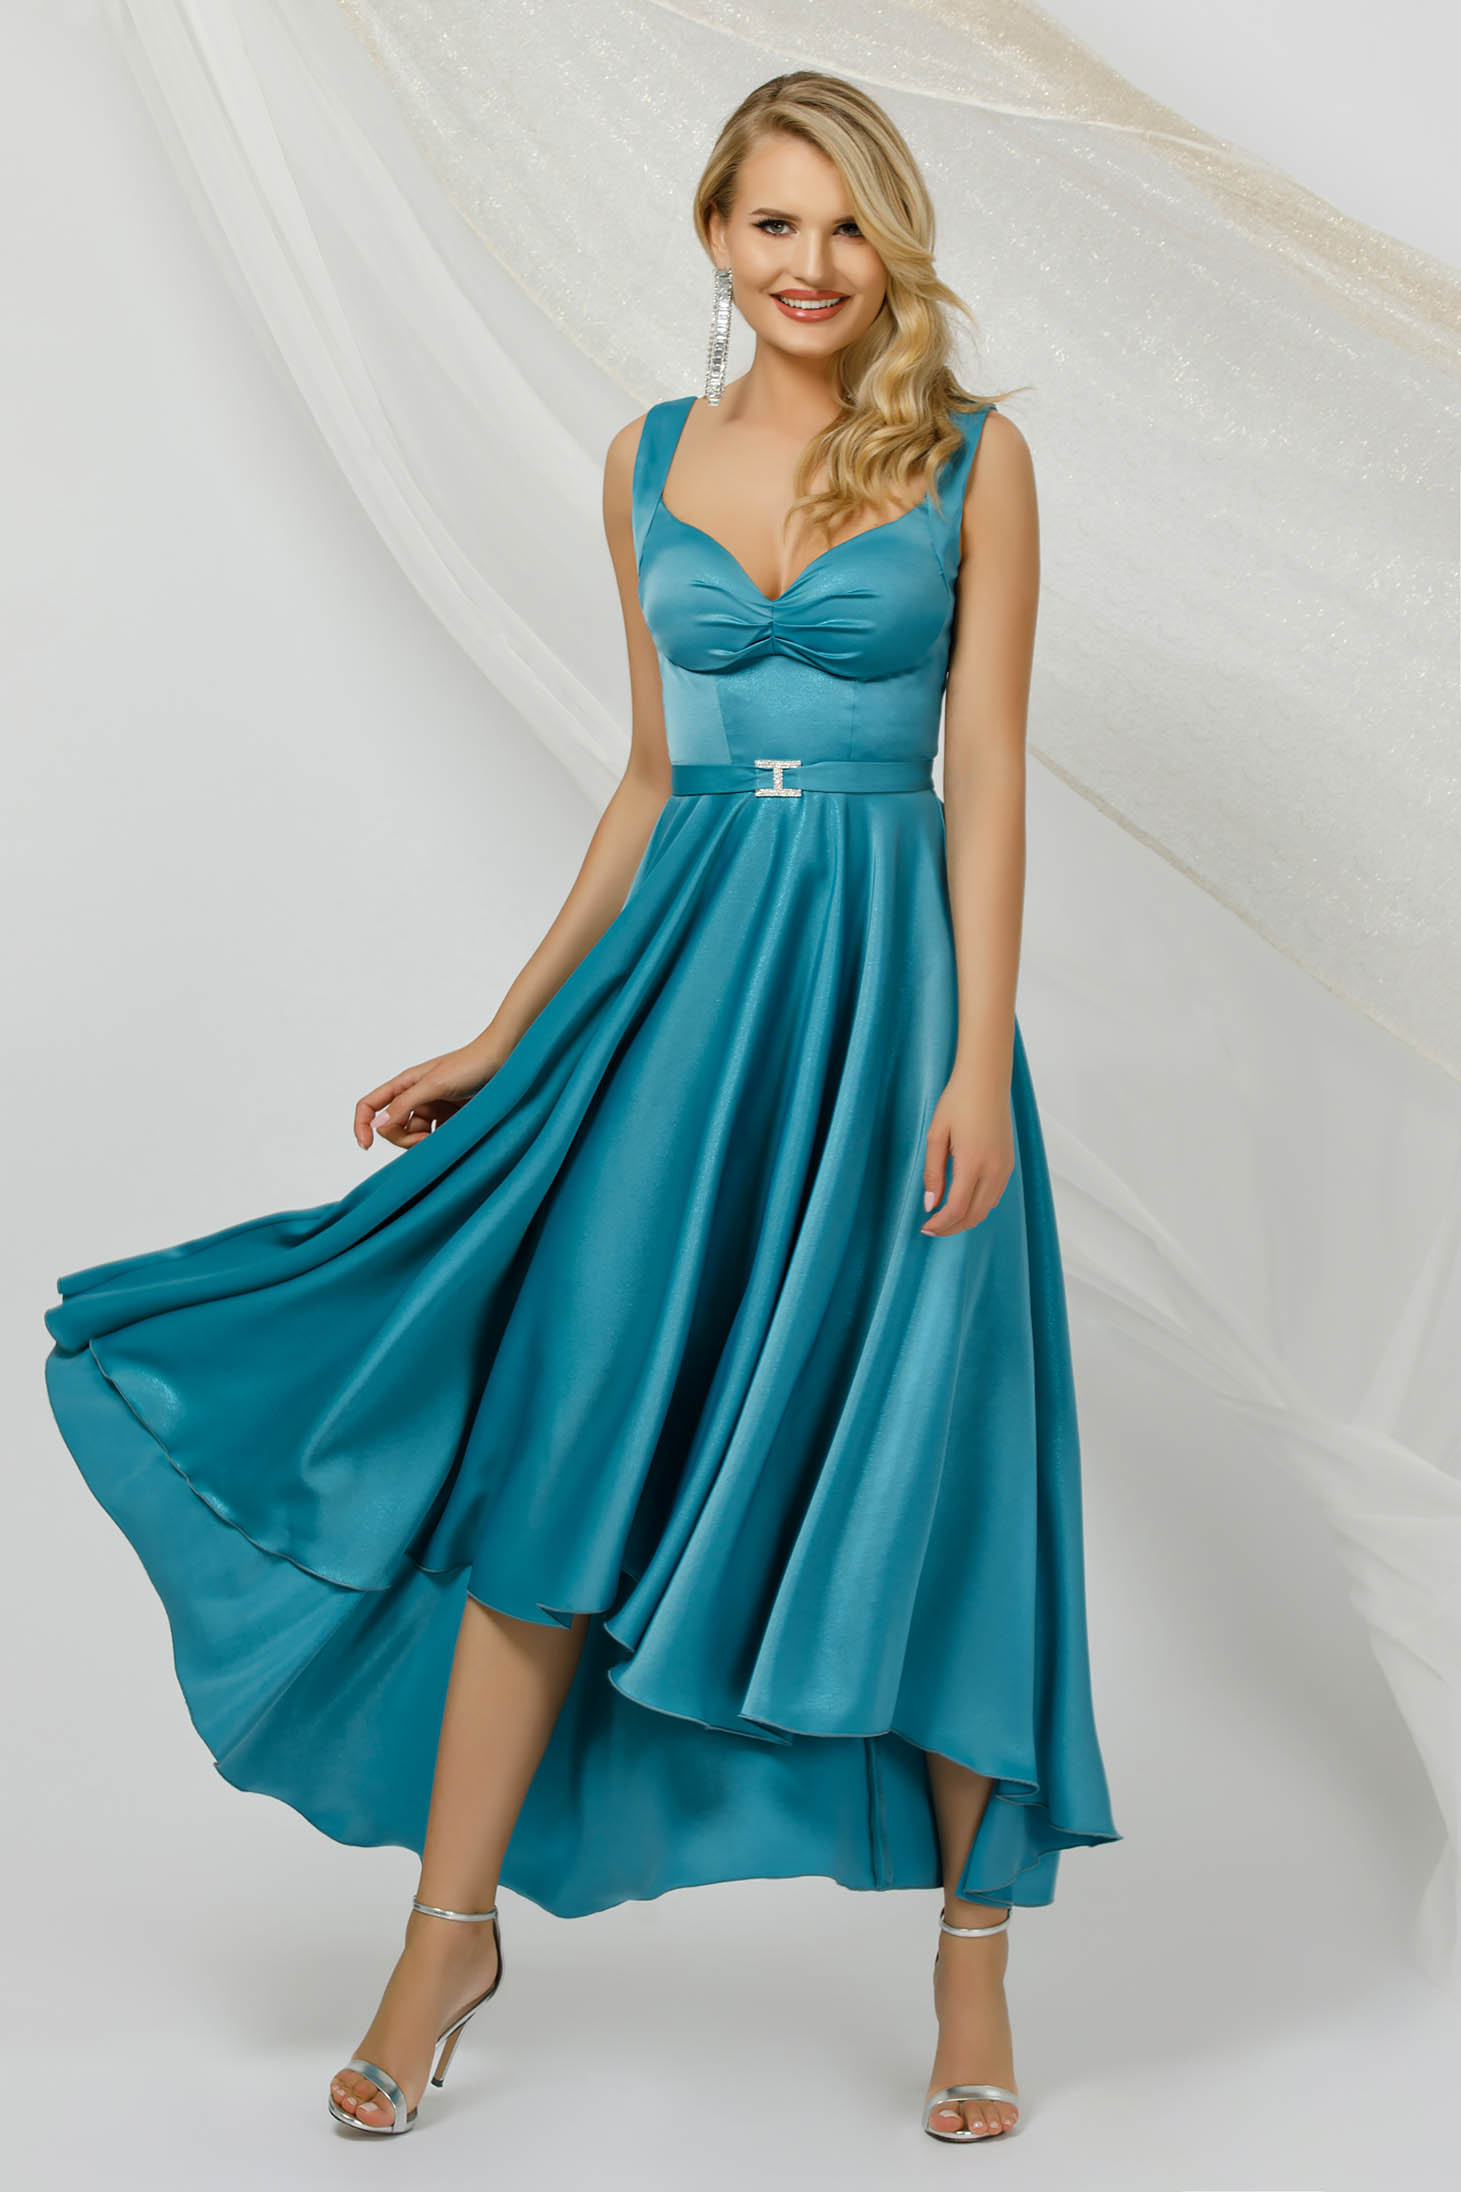 Turquoise dress from satin with glitter details cloche asymmetrical